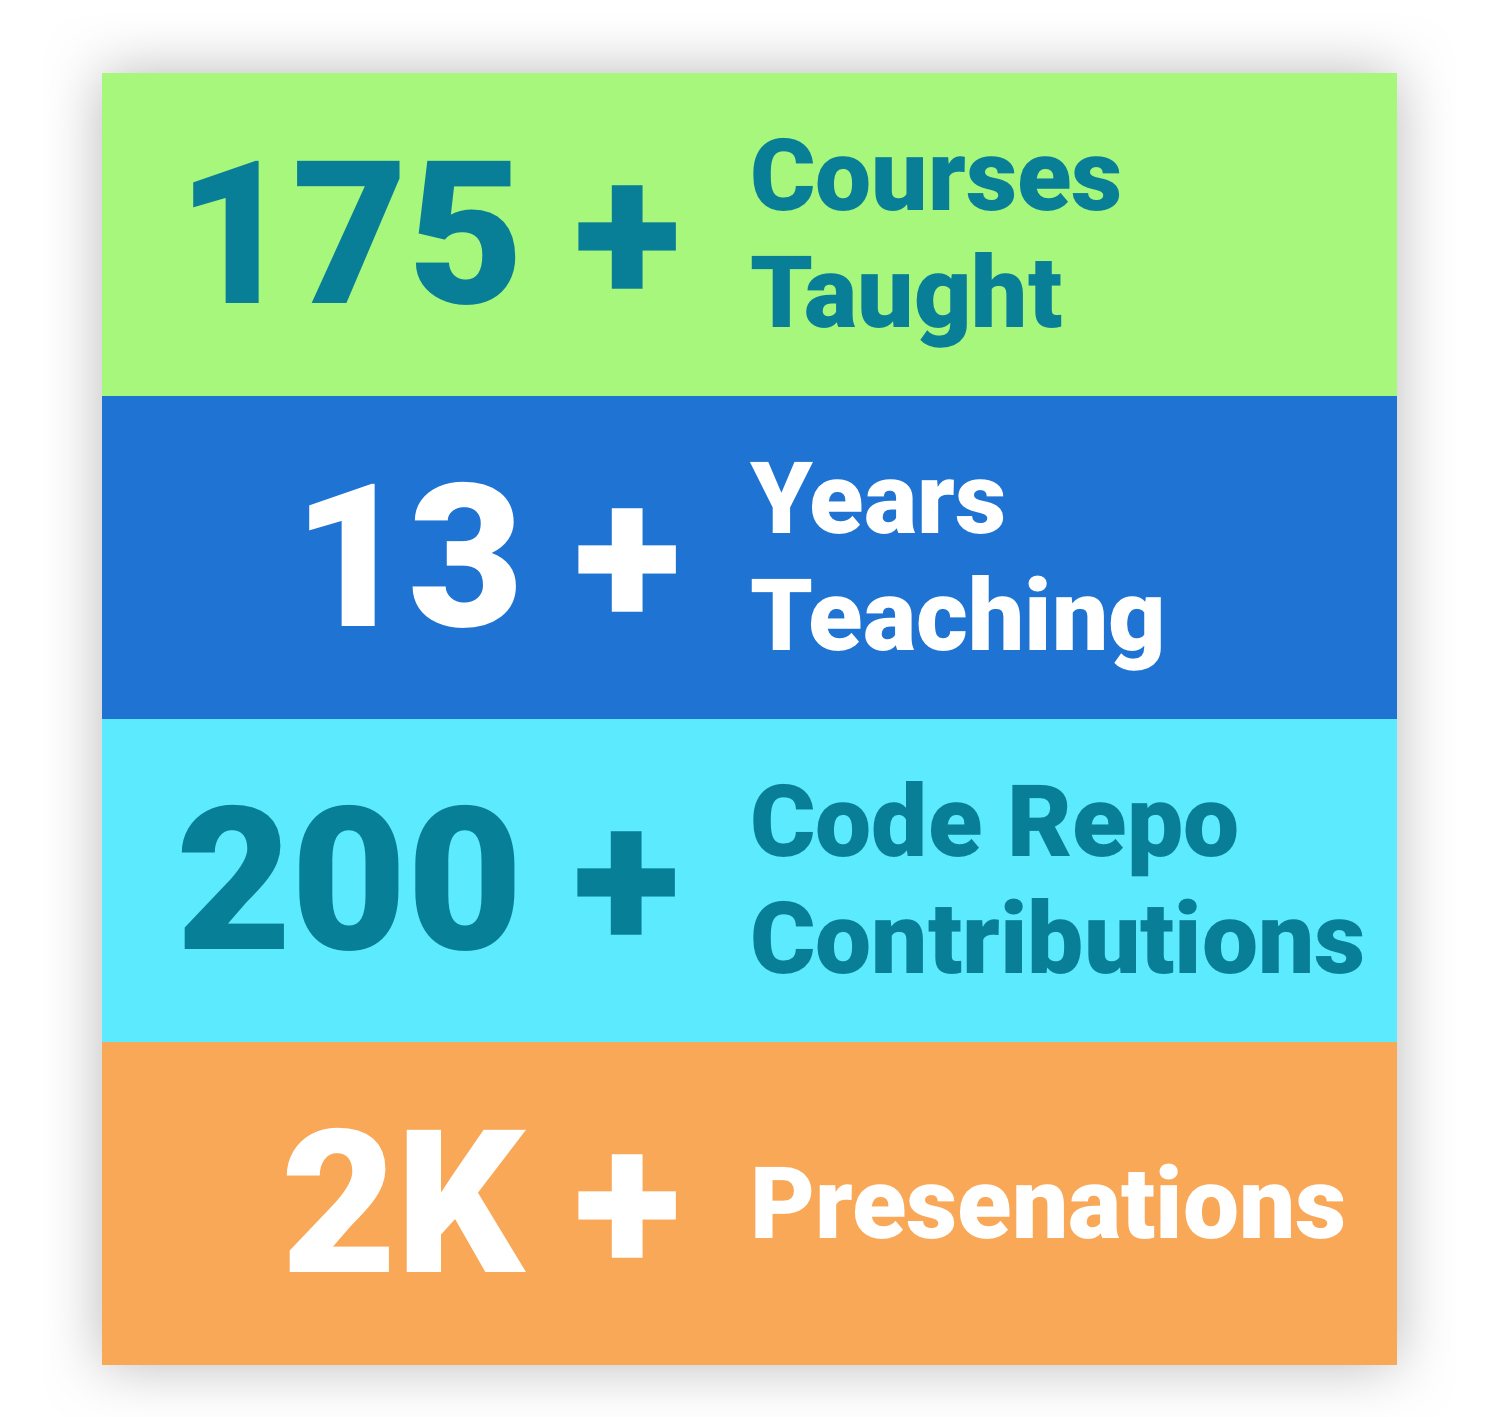 Joshua Sager has taught over 175 courses, has over 13 years teaching experience, has contributed to over 200 code repos, and has given over 2,000 presentations.